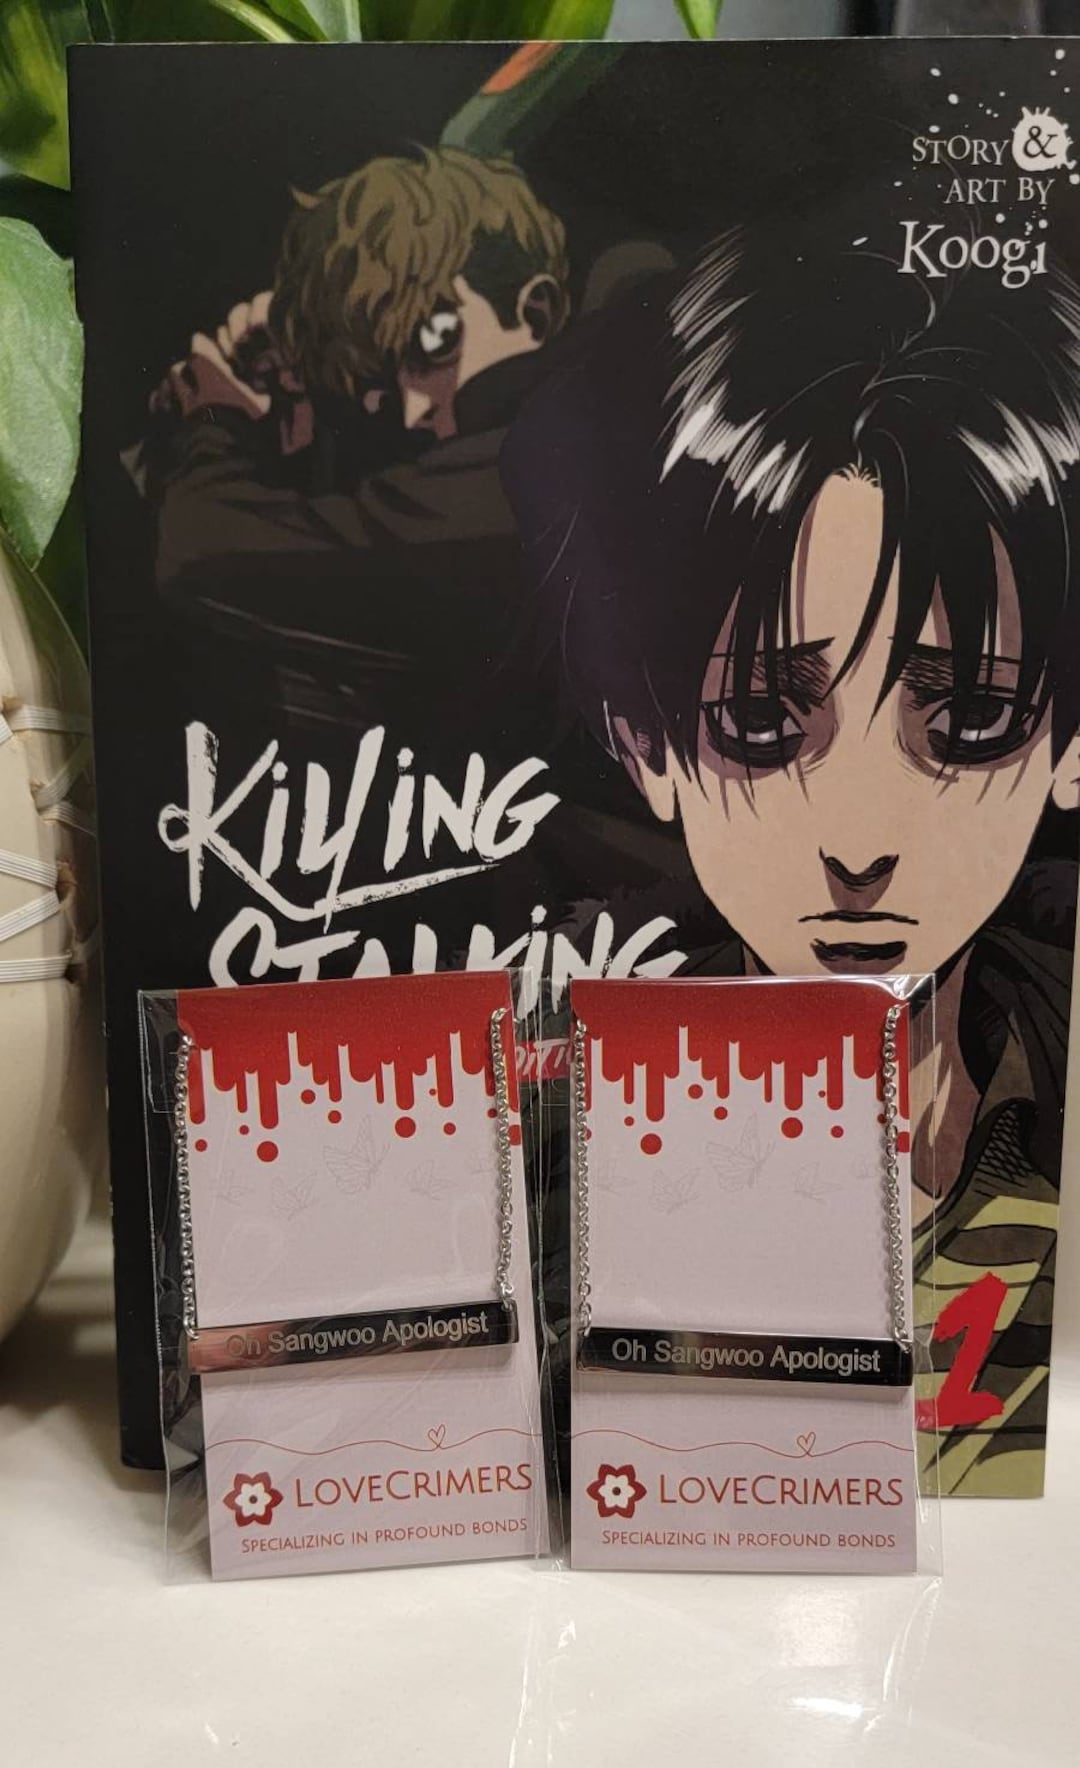 Killing Stalking Oh Sangwoo Apologist Engraved Bar Necklace 